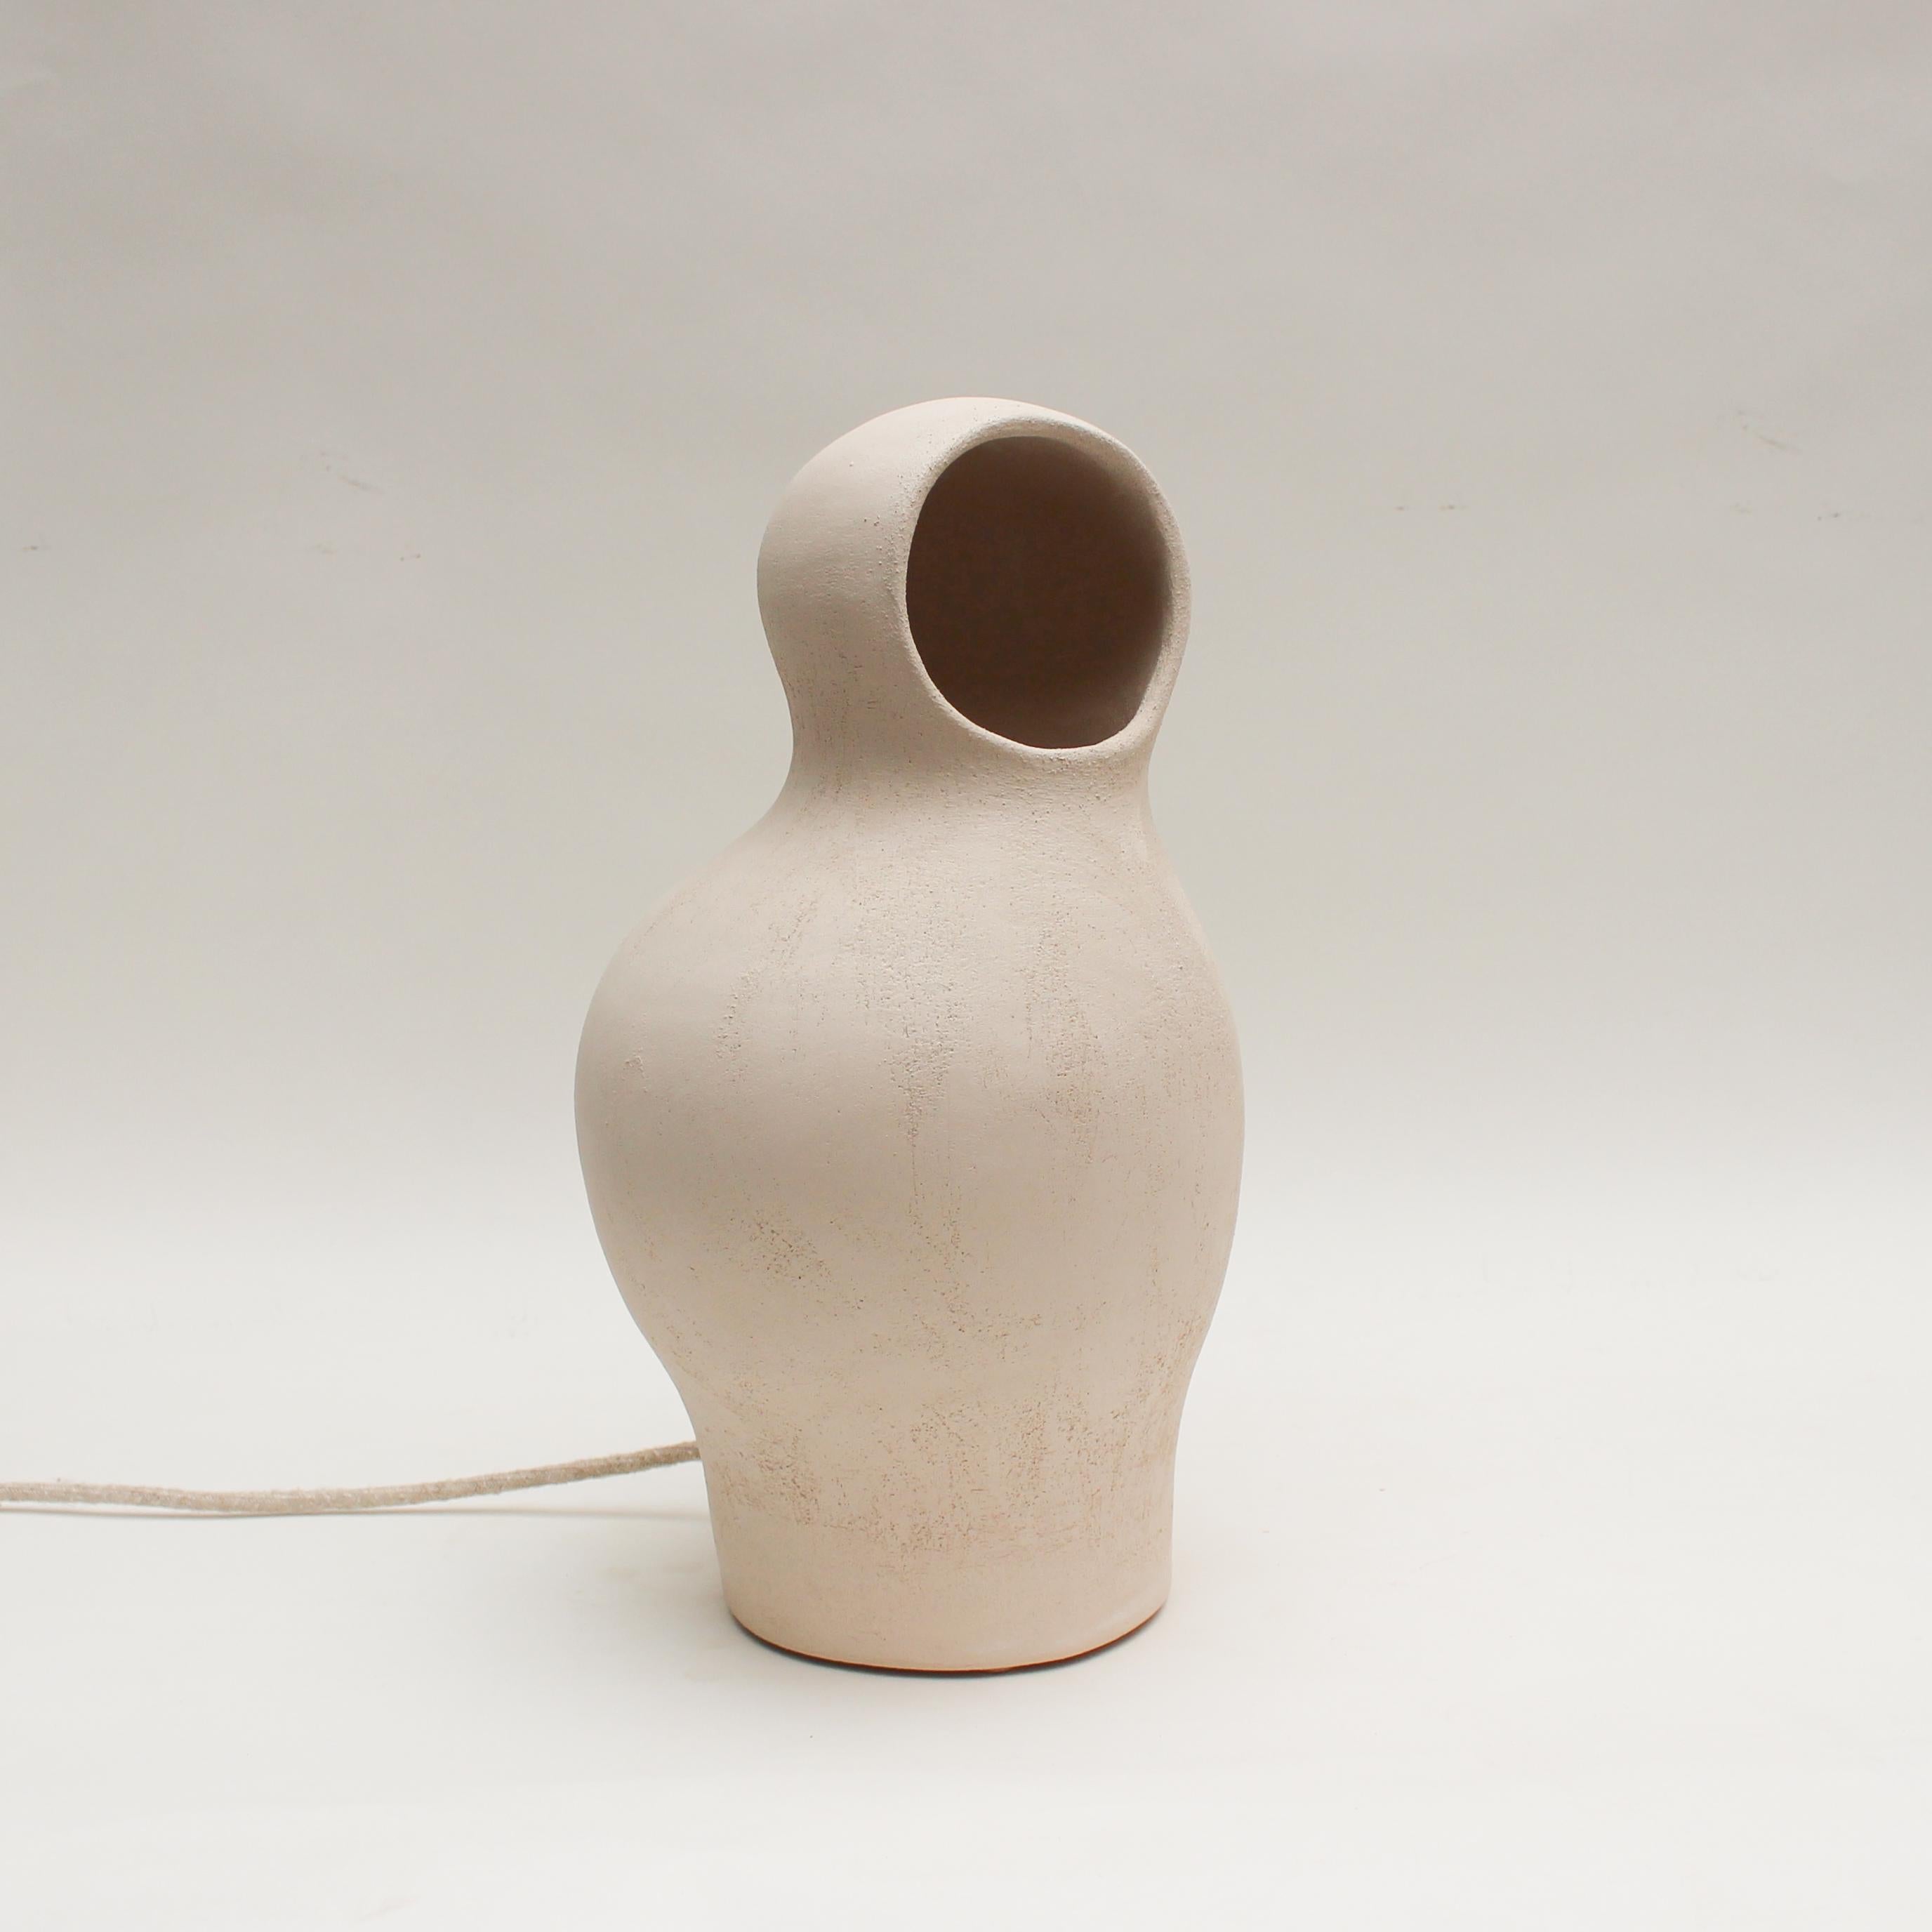 Cocon #3 white stoneware by Elisa Uberti.
Dimensions: high around 35 cm.
Materials: white stoneware.

After fifteen years in fashion, Elisa Uberti decides to take the time to work with these hands and to give birth to new projects.

Designer and